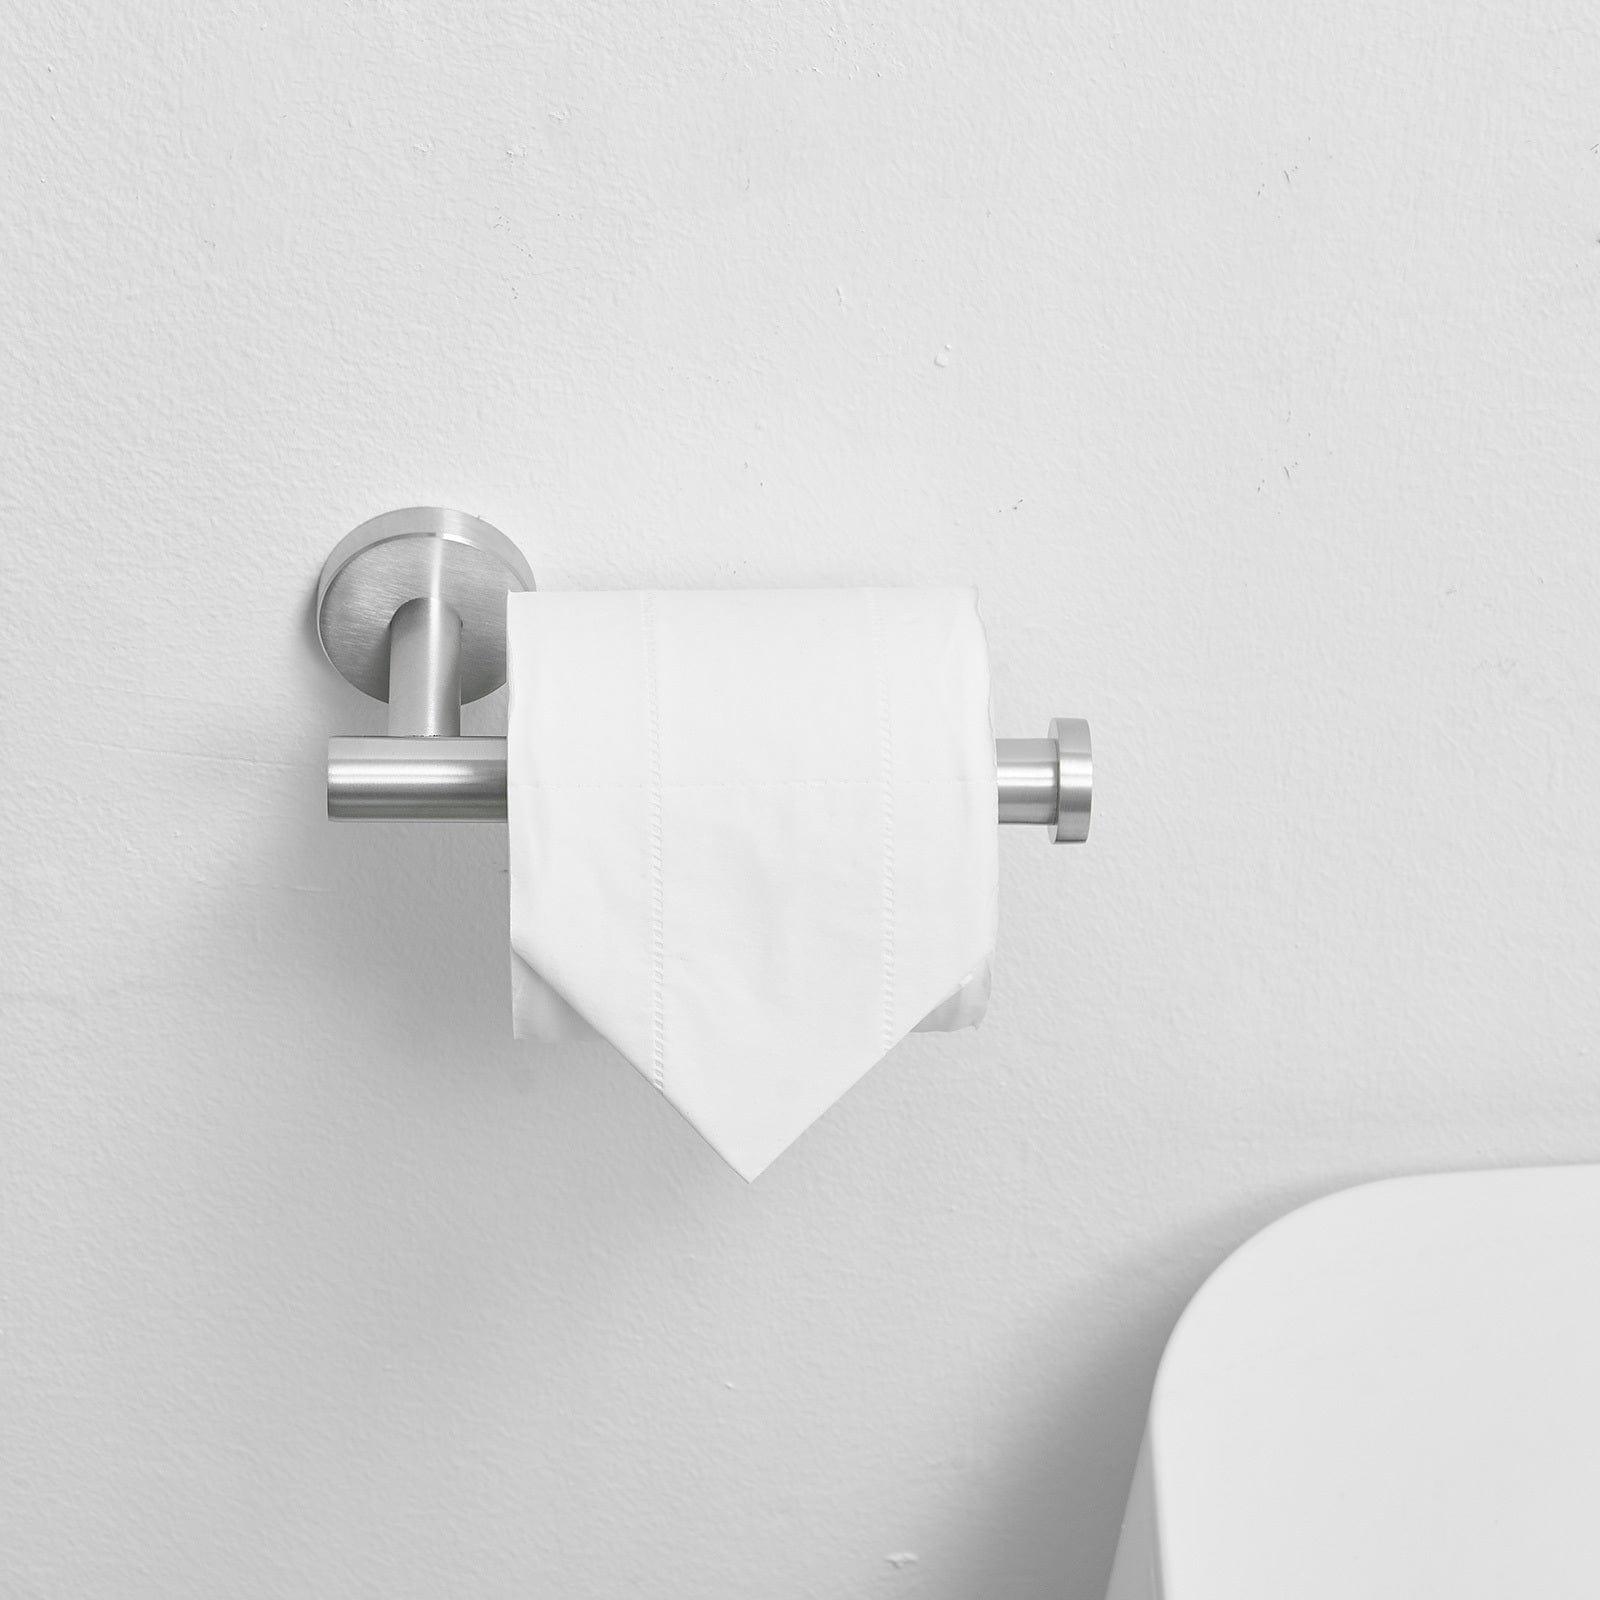 Shop Single Post Toilet Paper Holder Wall Mounted in Brushed Nickel Mademoiselle Home Decor